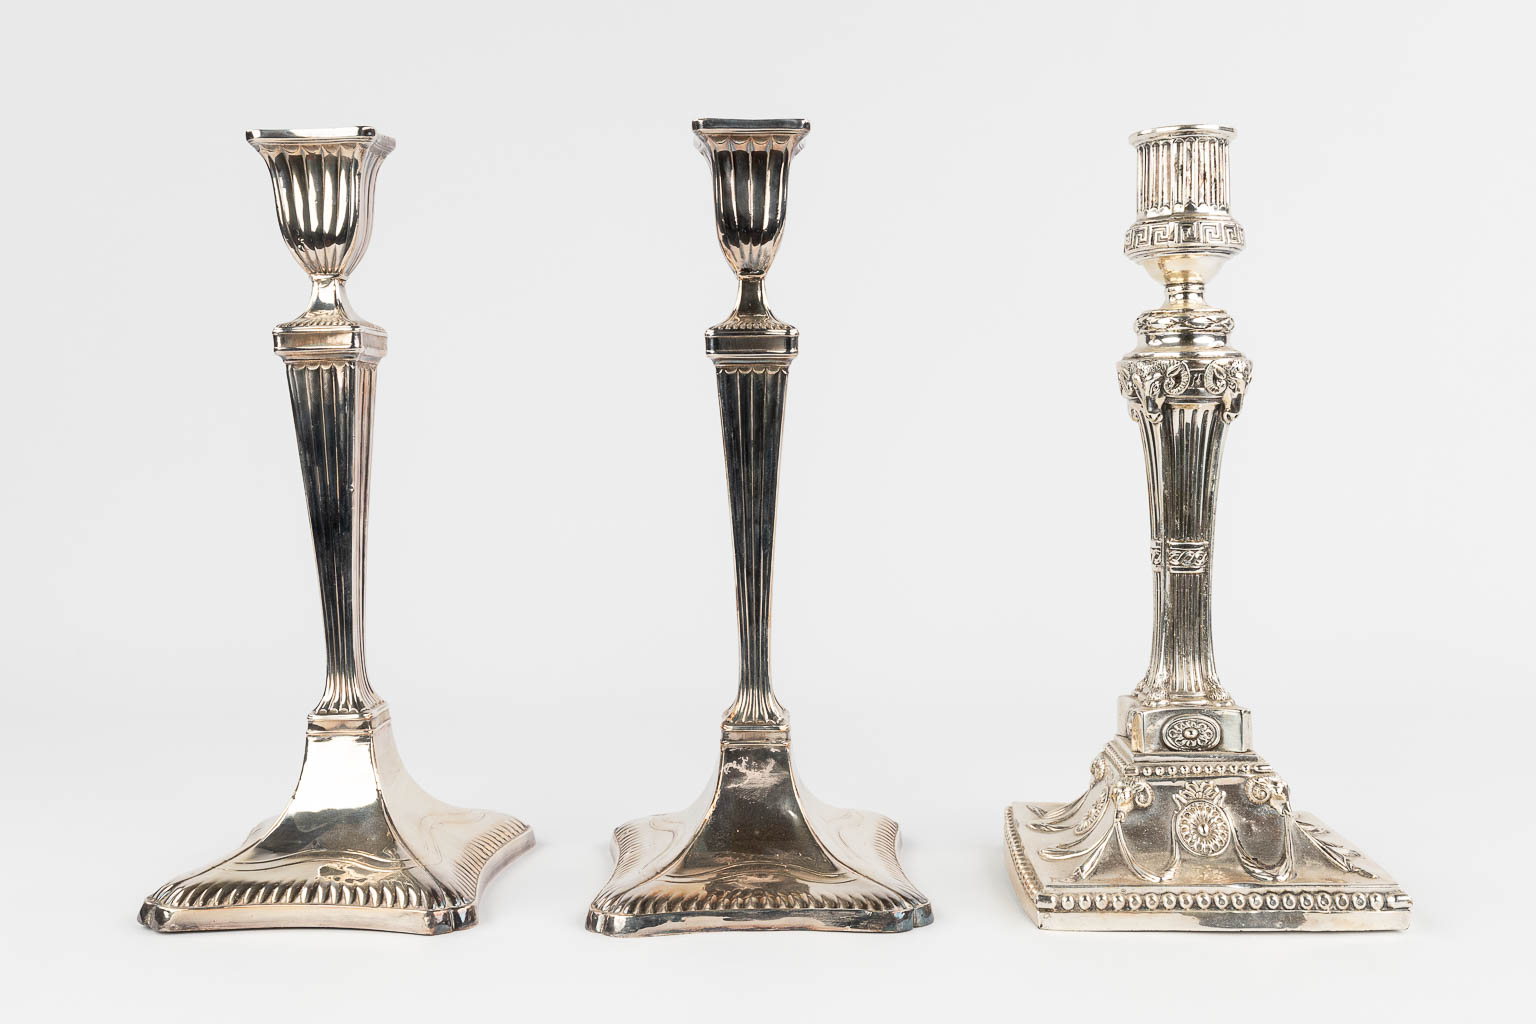 A collection of 3 silver candlesticks, of which 2 are a pair. (L: 13 x W: 14,5 x H: 29 cm)